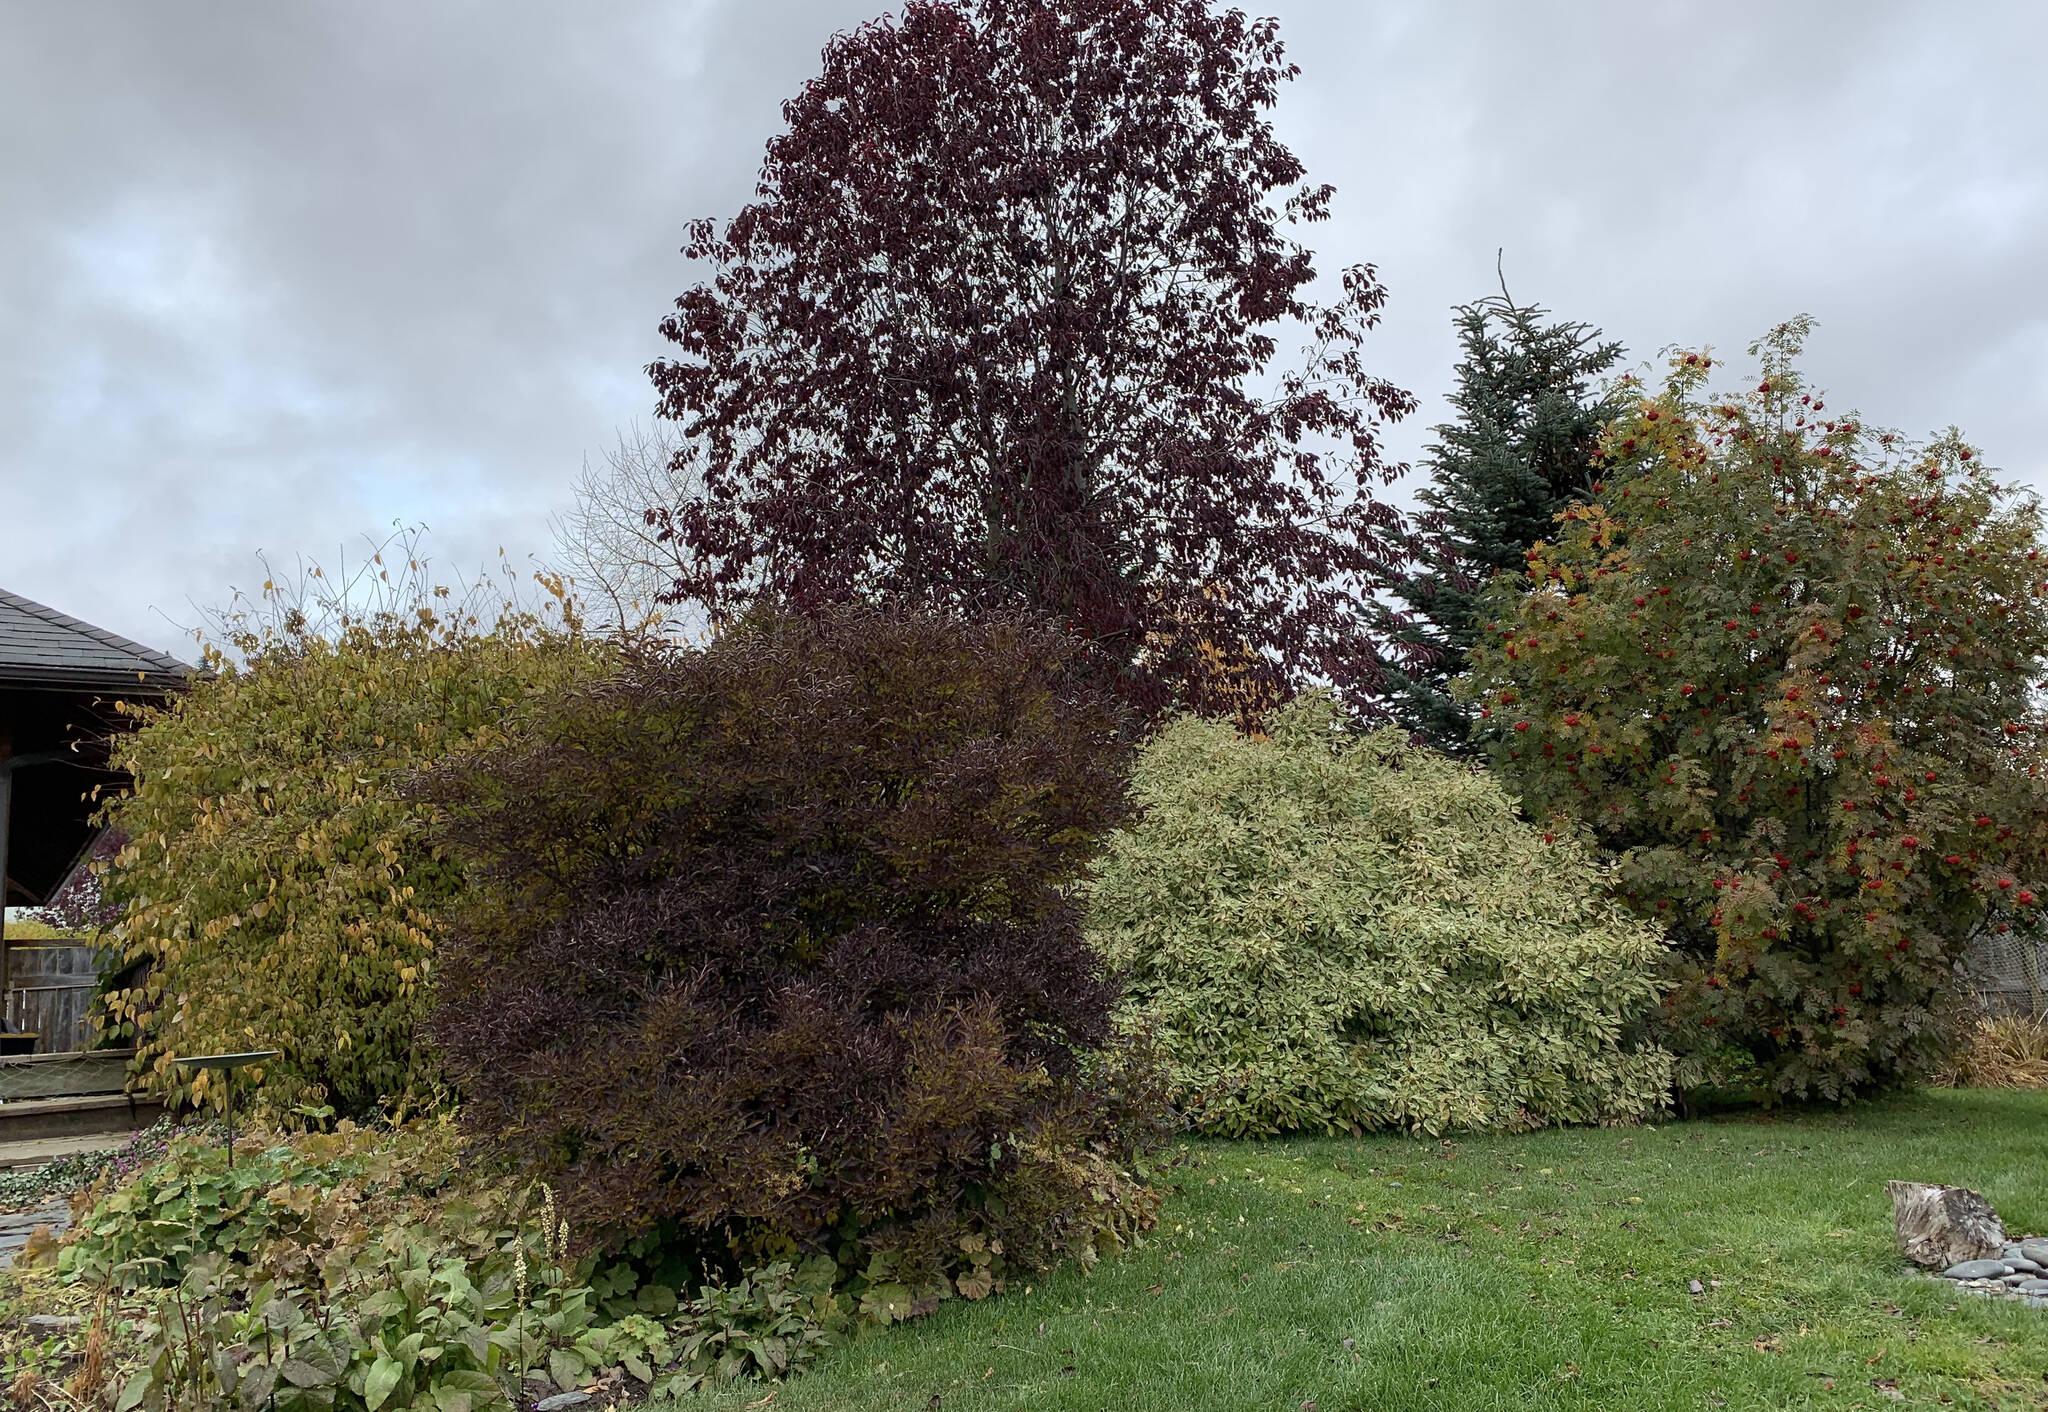 Mock orange, Shubert’s Red, mountain ash, red twigged dogwood and Miss Kim lilac, all successfully blend their fall colors. (Photo by Rosemary Fitzpatrick)